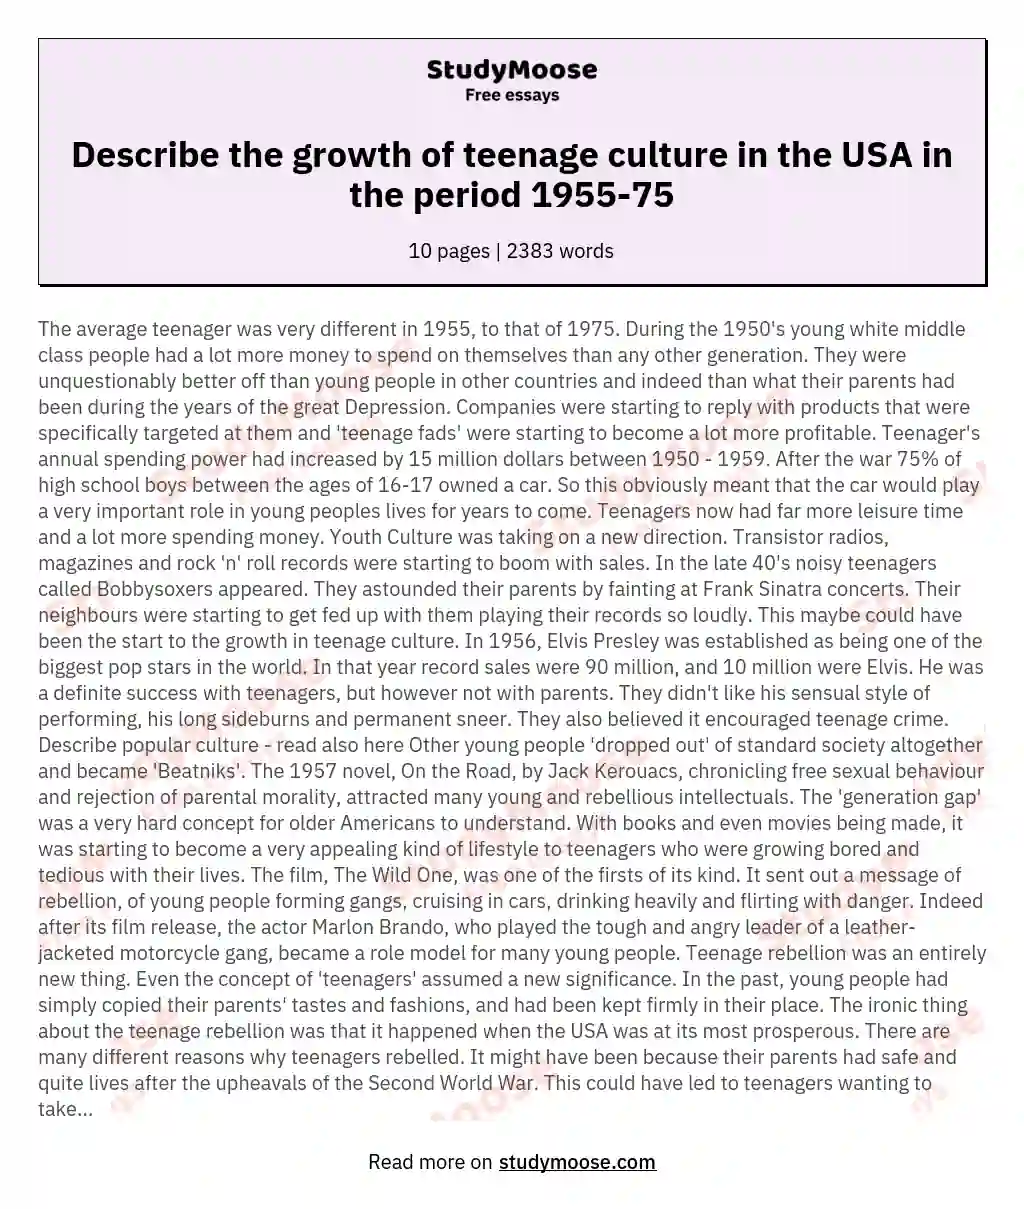 Describe the growth of teenage culture in the USA in the period 1955-75 essay